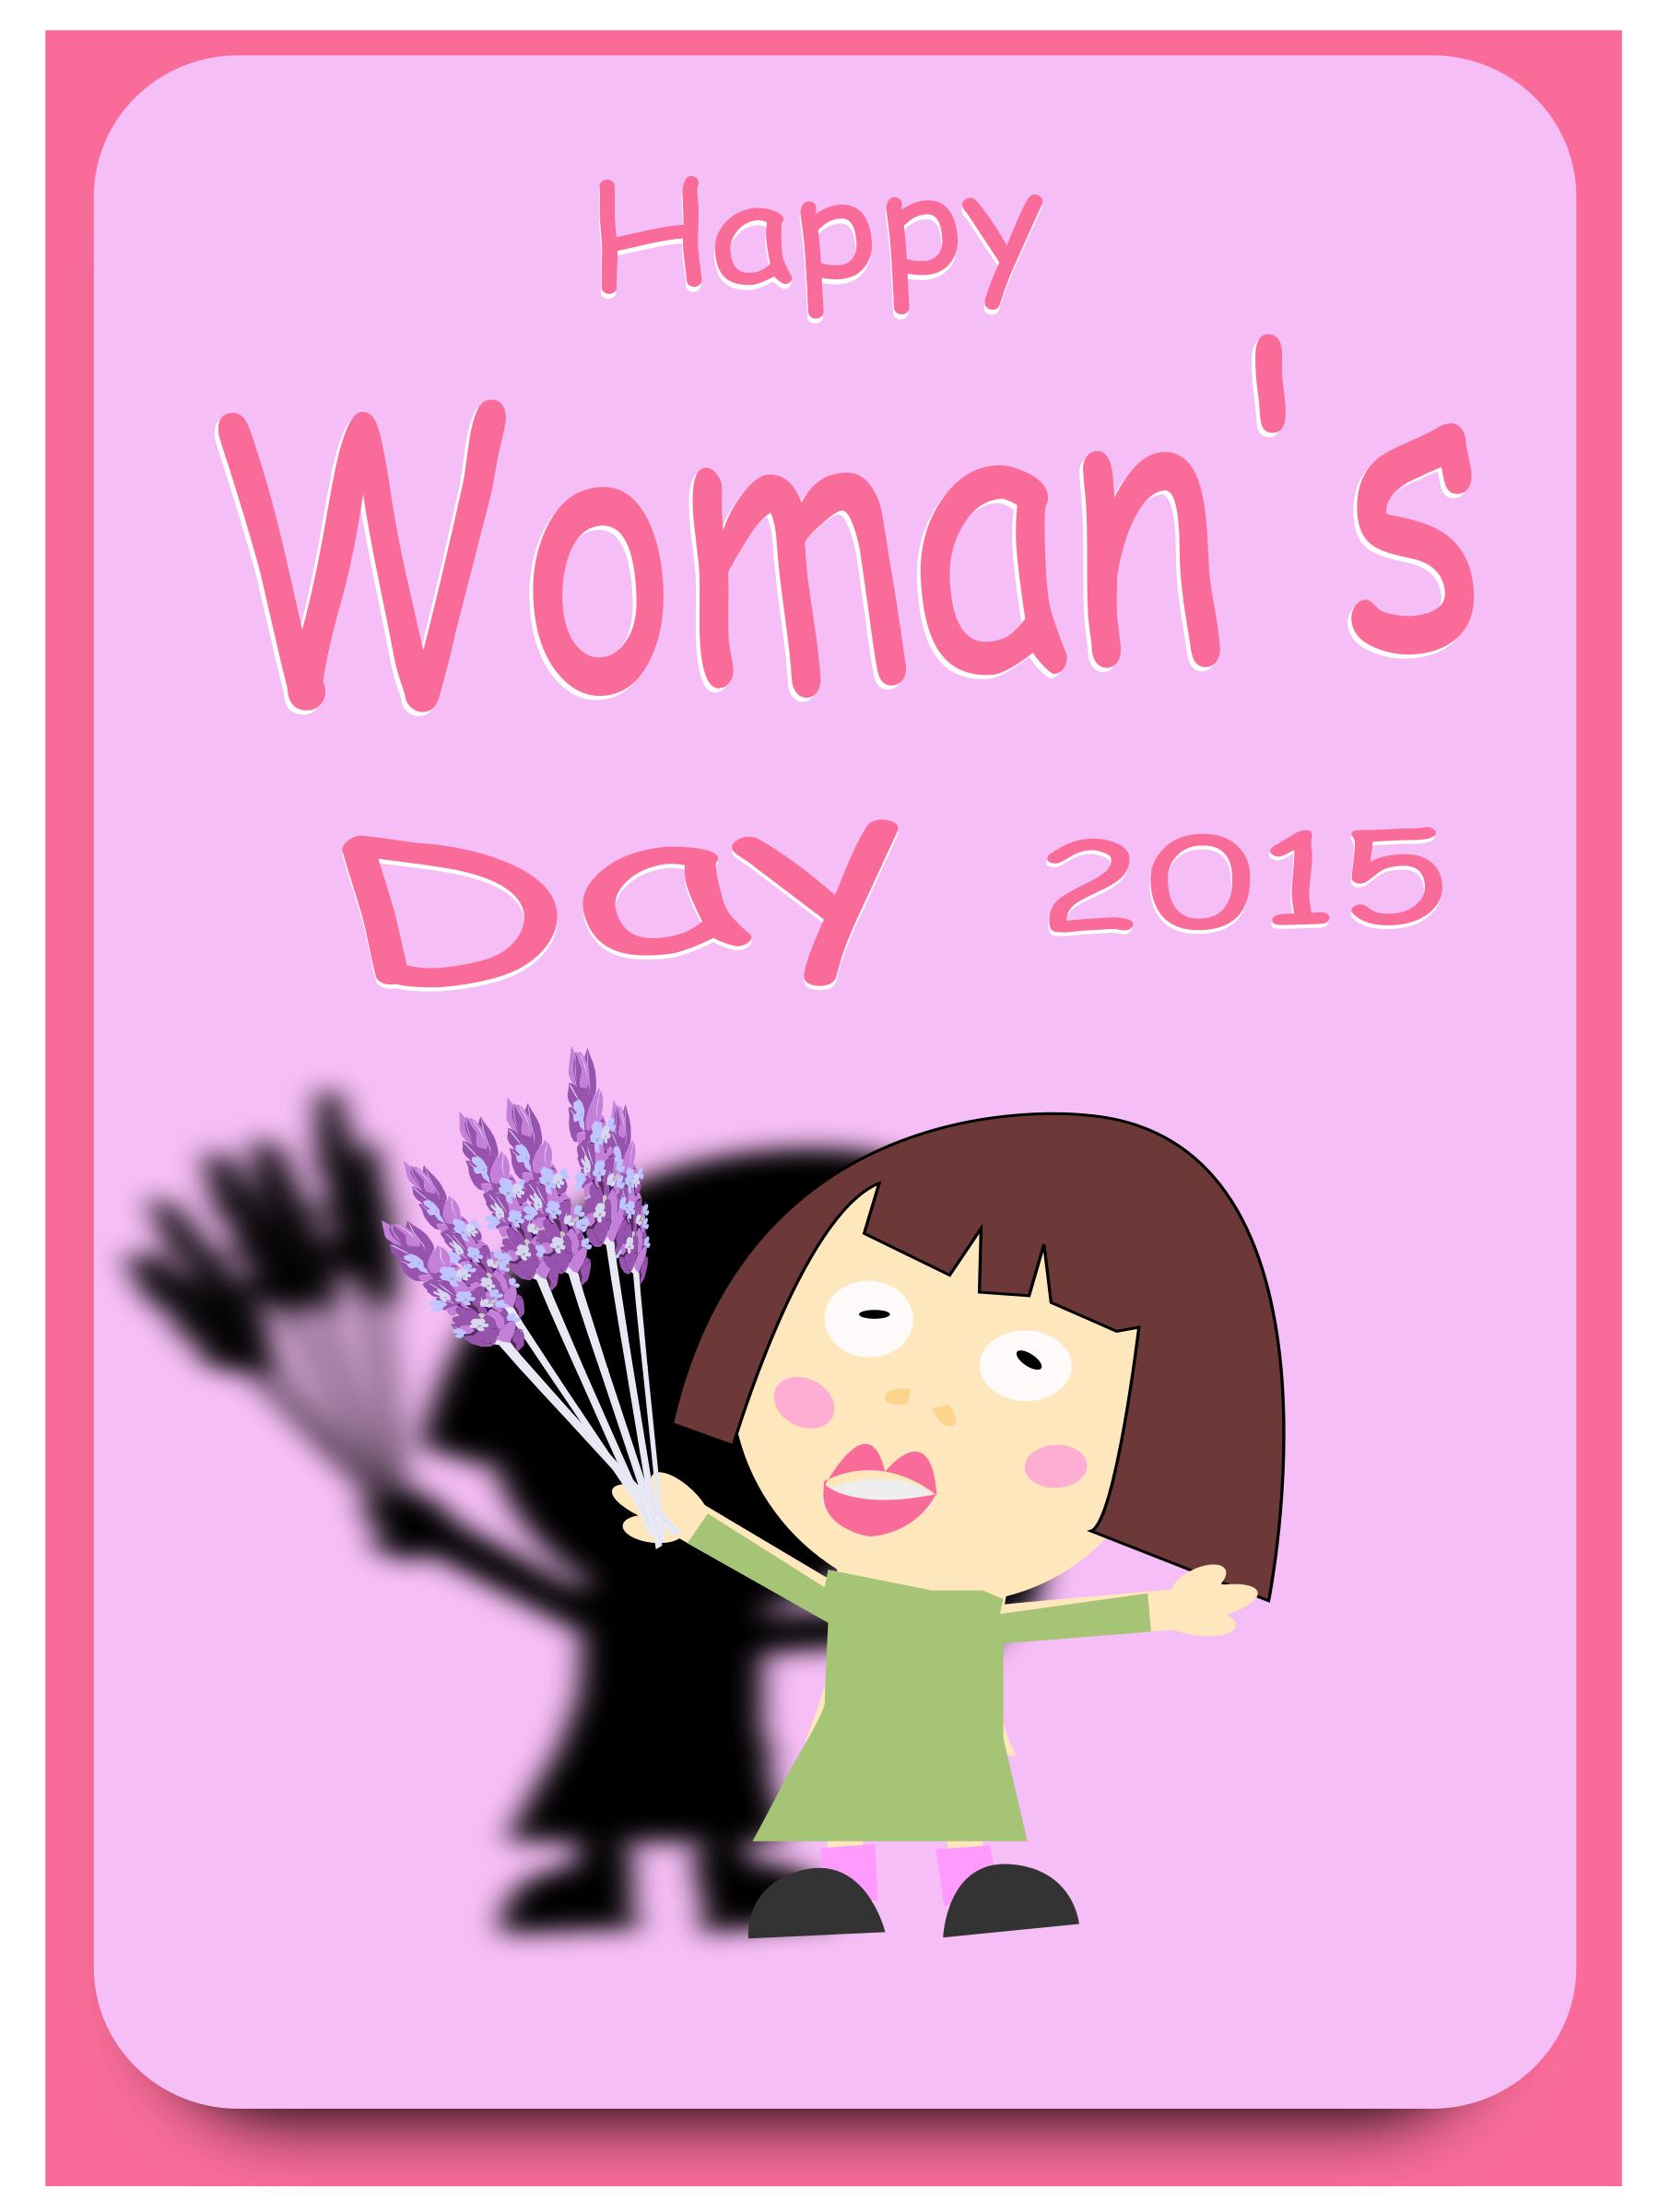 Womans day 2015 icons